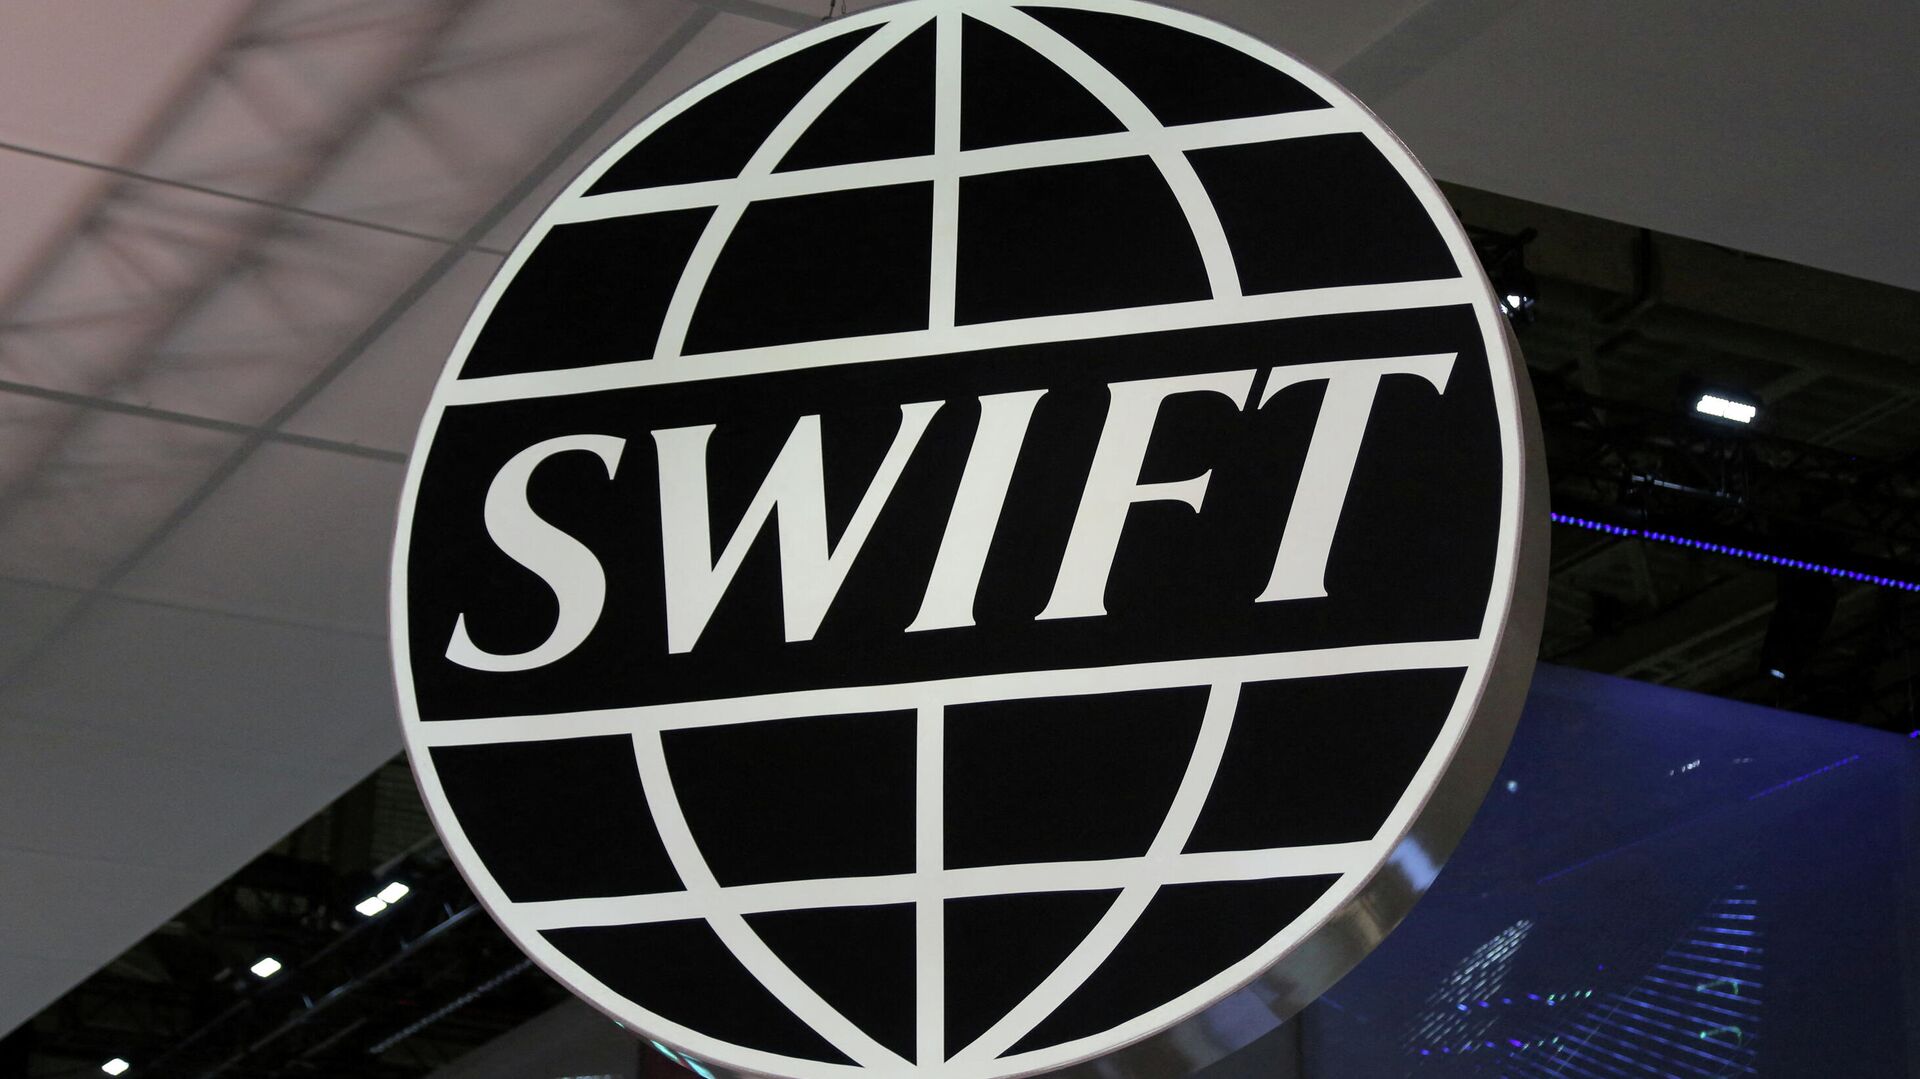 The logo of global secure financial messaging services cooperative SWIFT is seen at the SIBOS banking and financial conference in Toronto, Ontario, Canada October 19, 2017 - Sputnik International, 1920, 25.02.2022